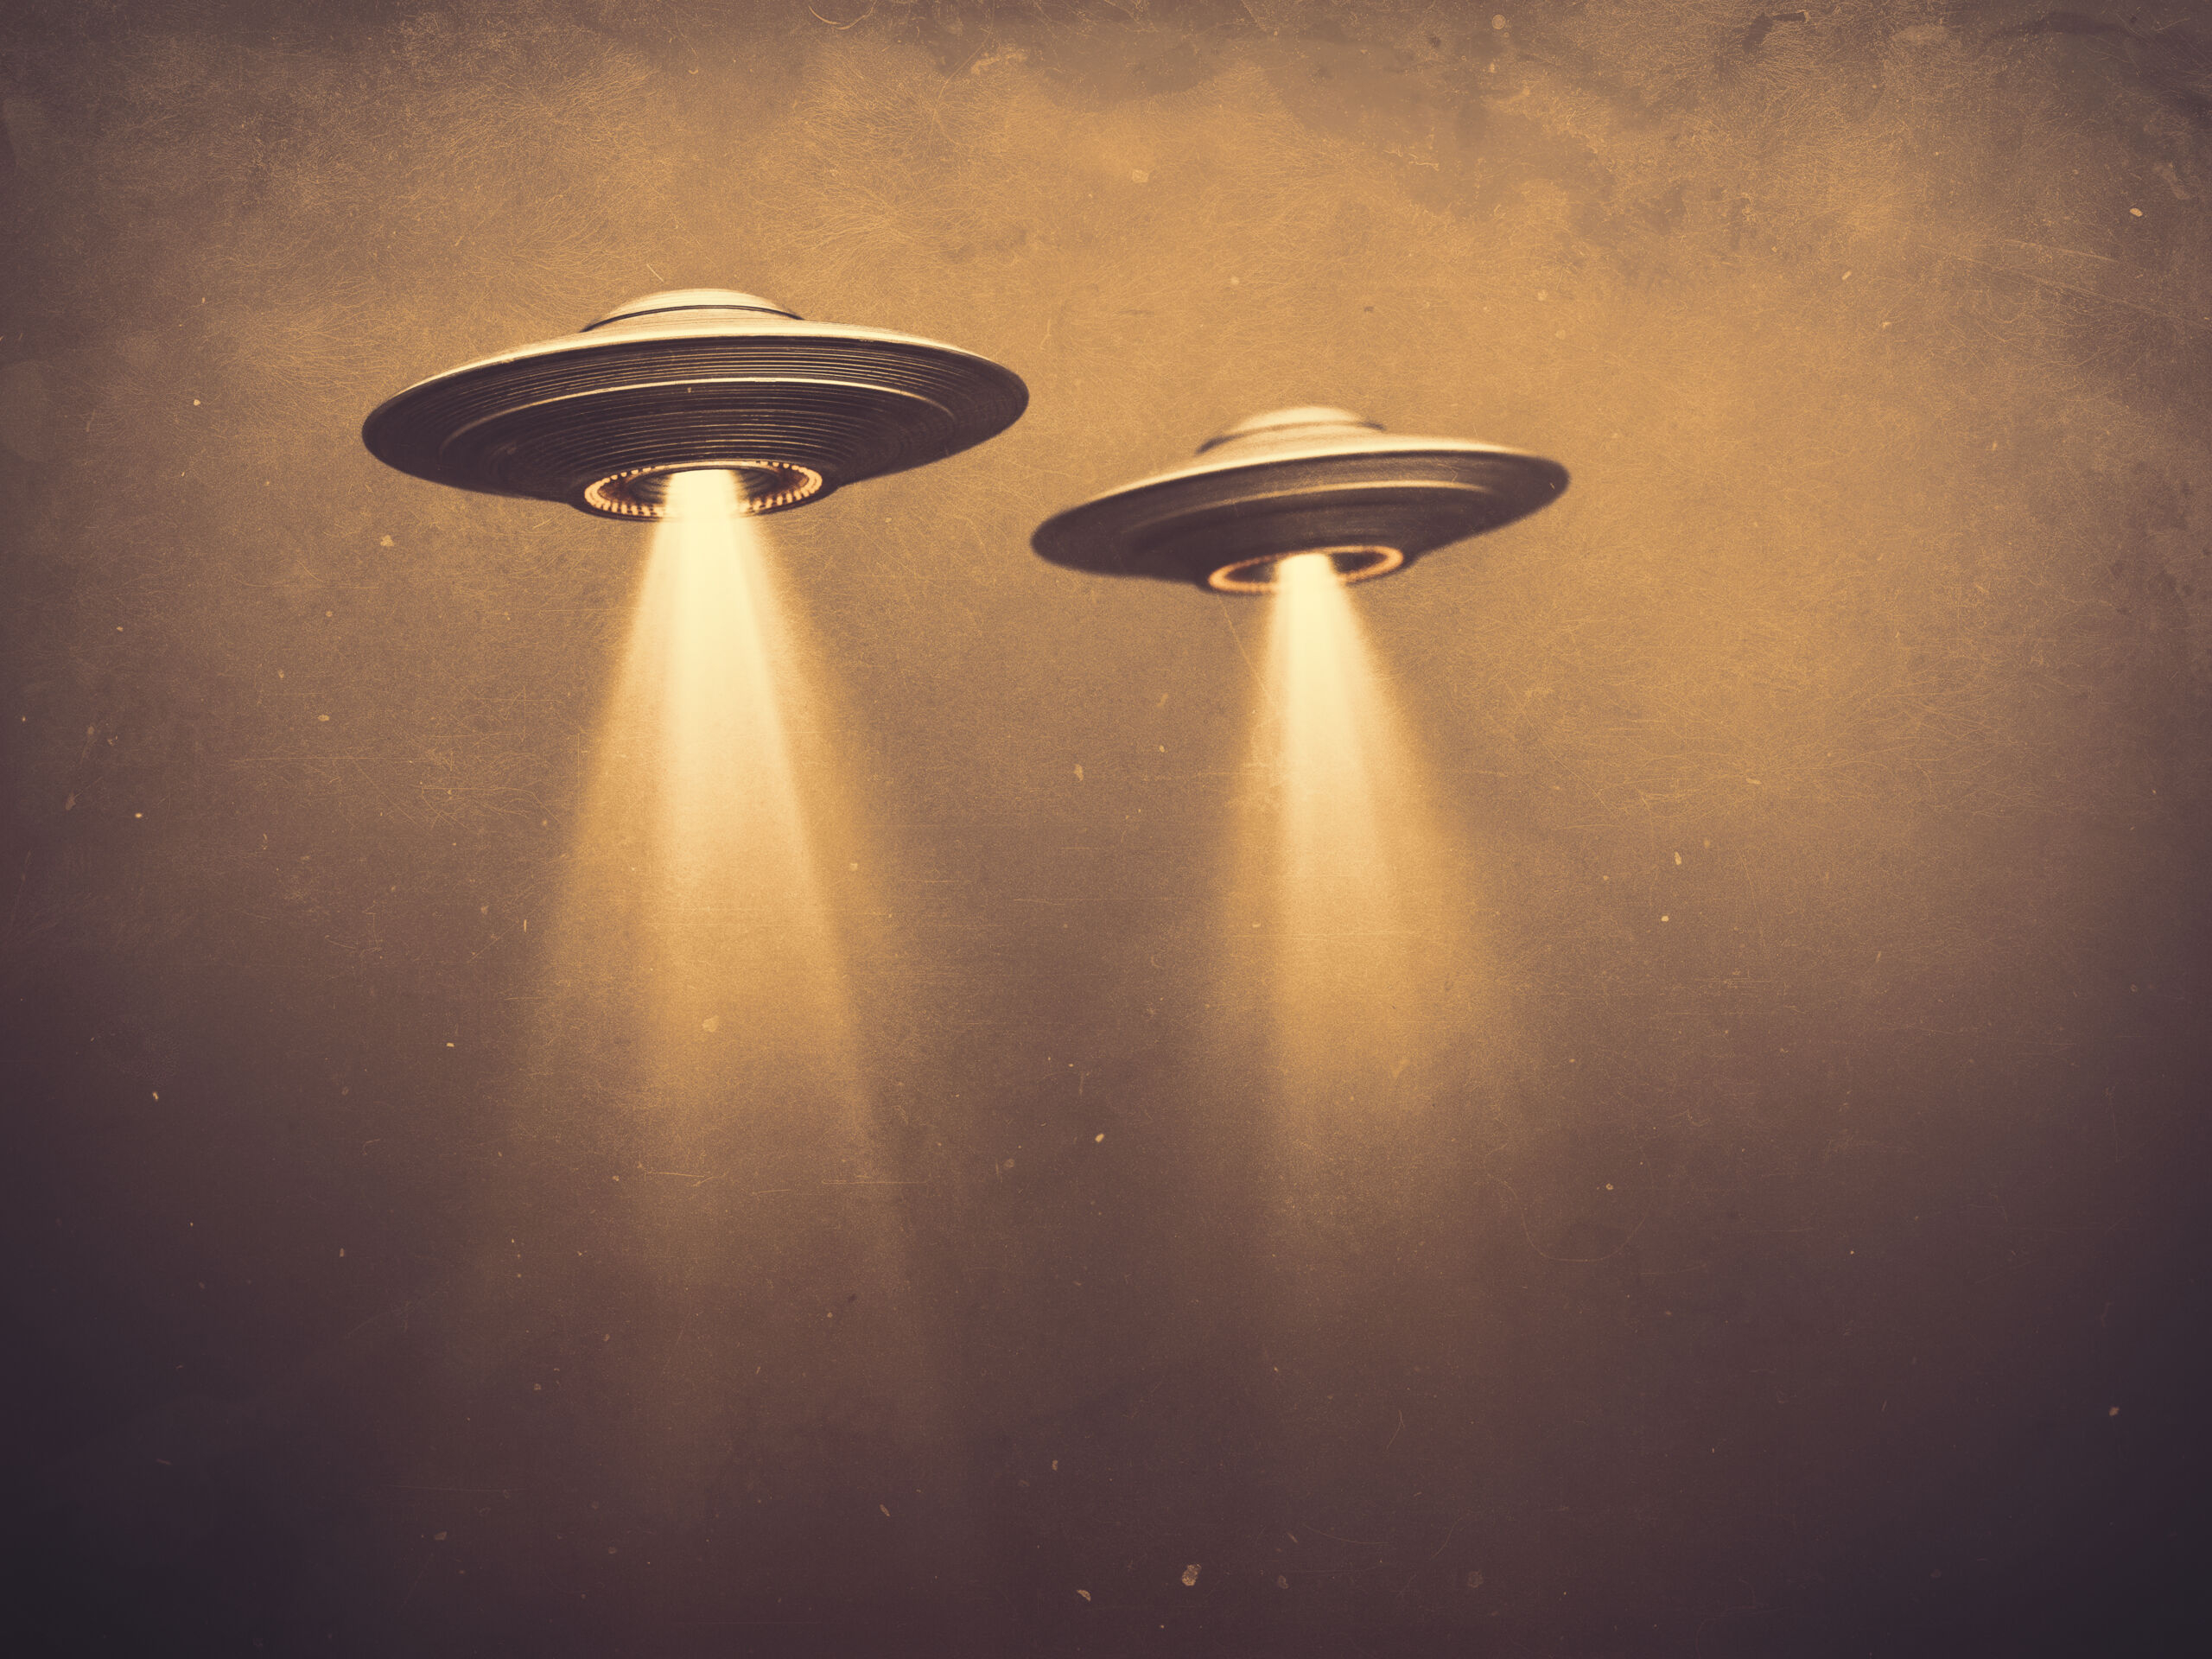 2560x1920 Head of NASA Suggests That UFOs Could Be Alien Technology